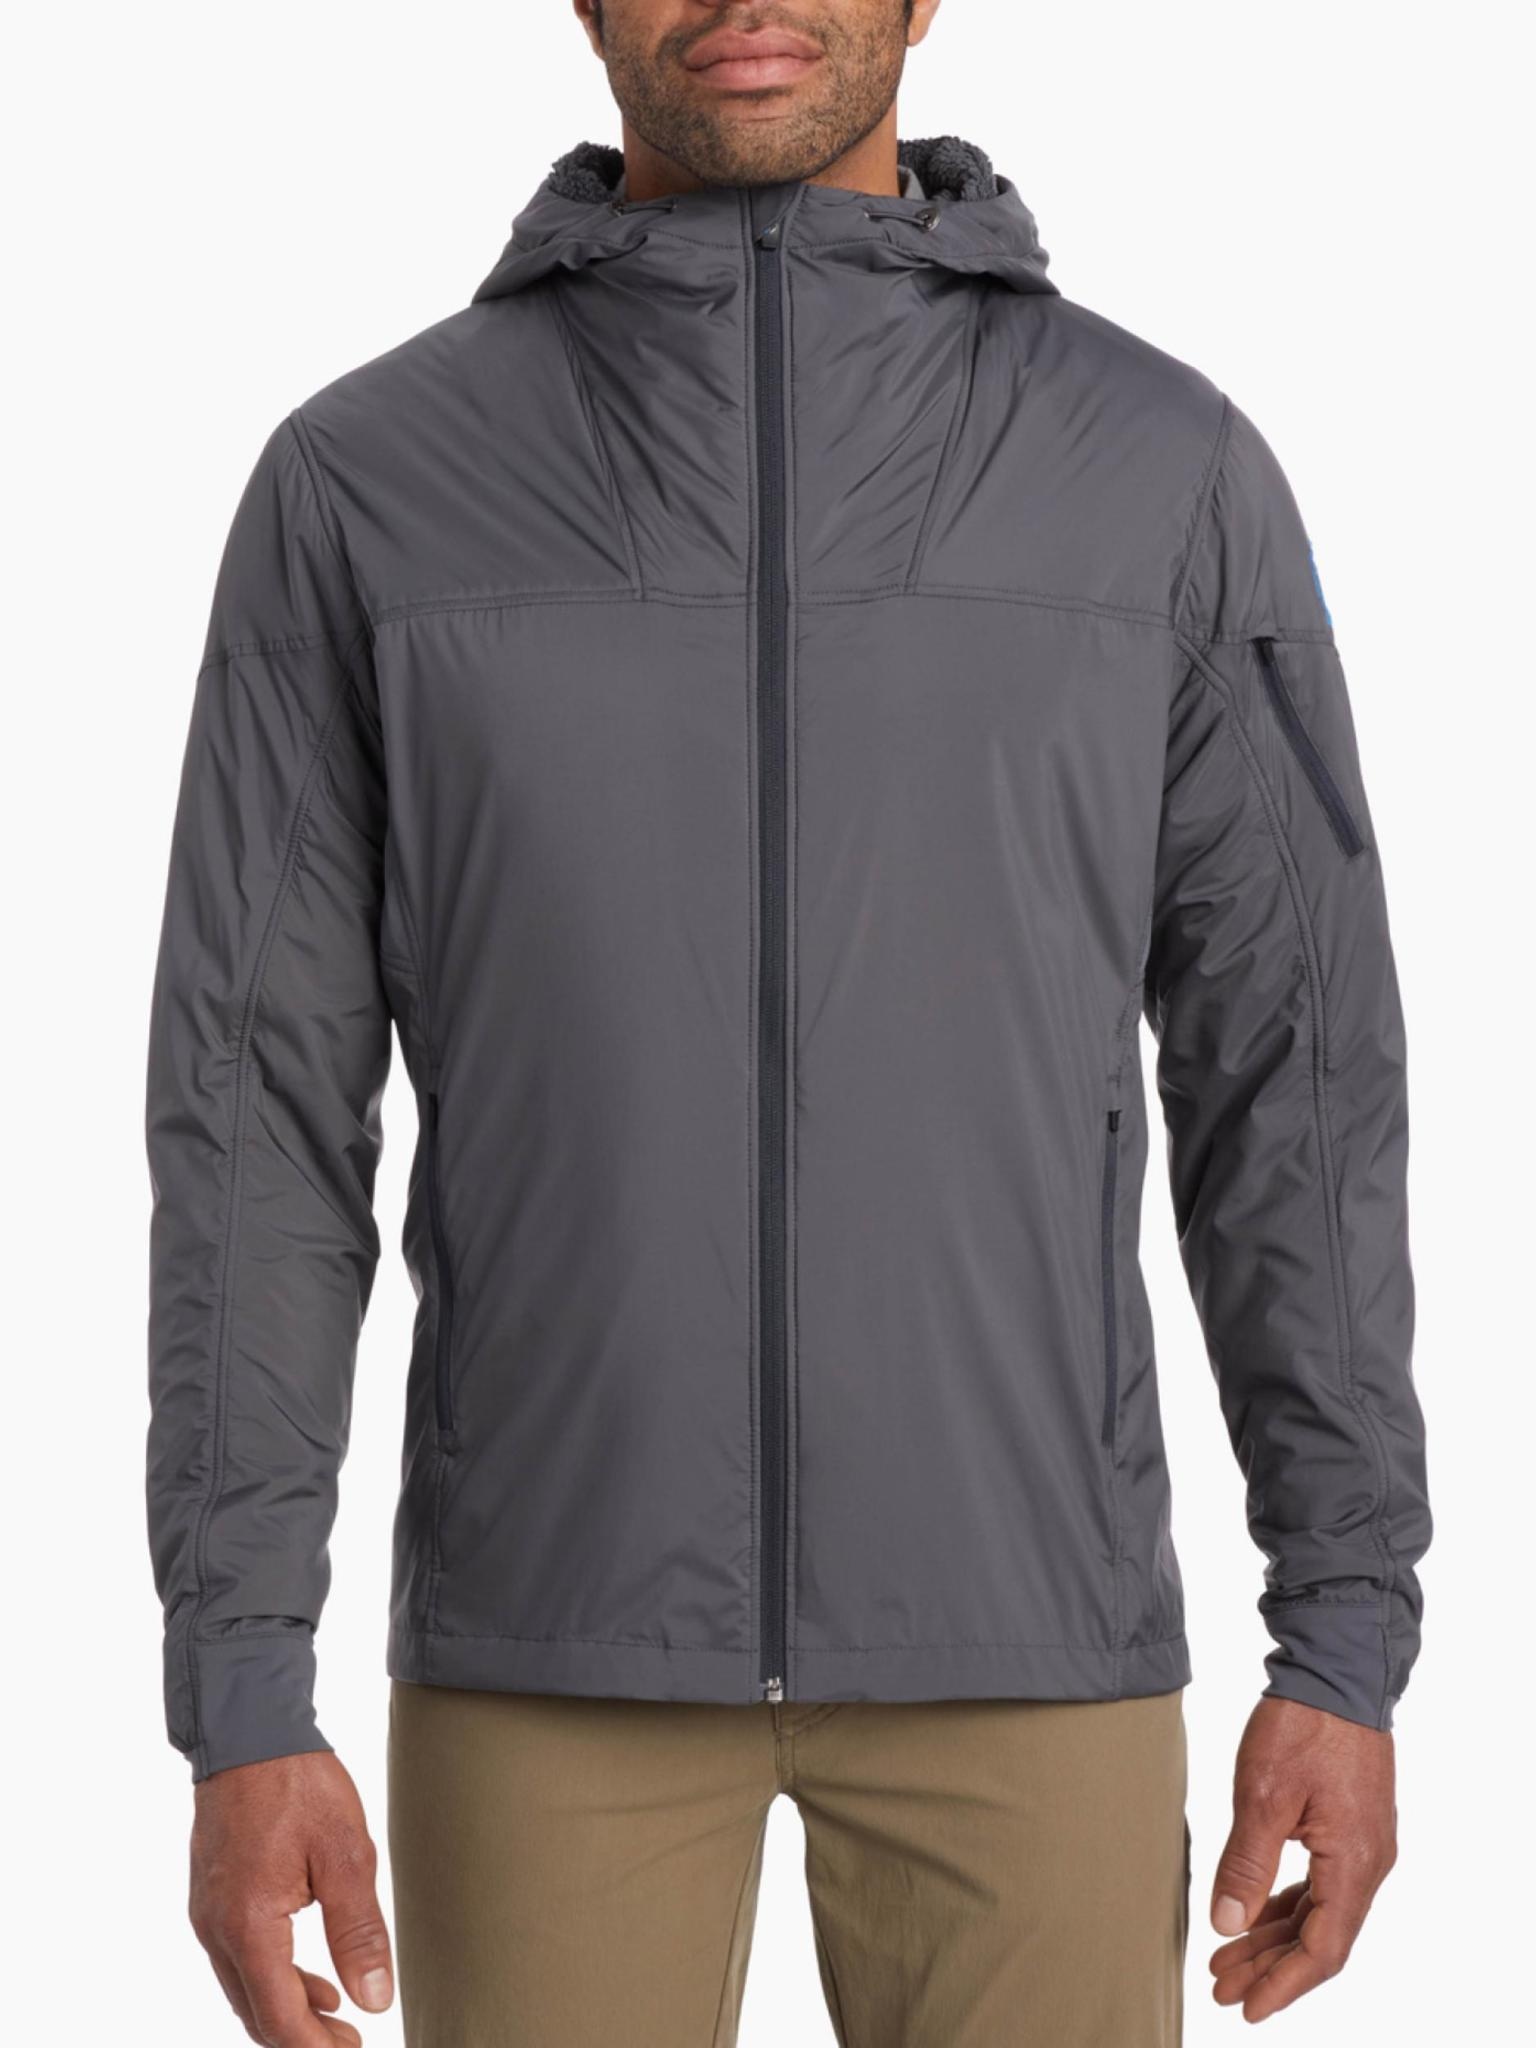 Whole Earth Provision Co.  PATAGONIA Patagonia Men's Classic